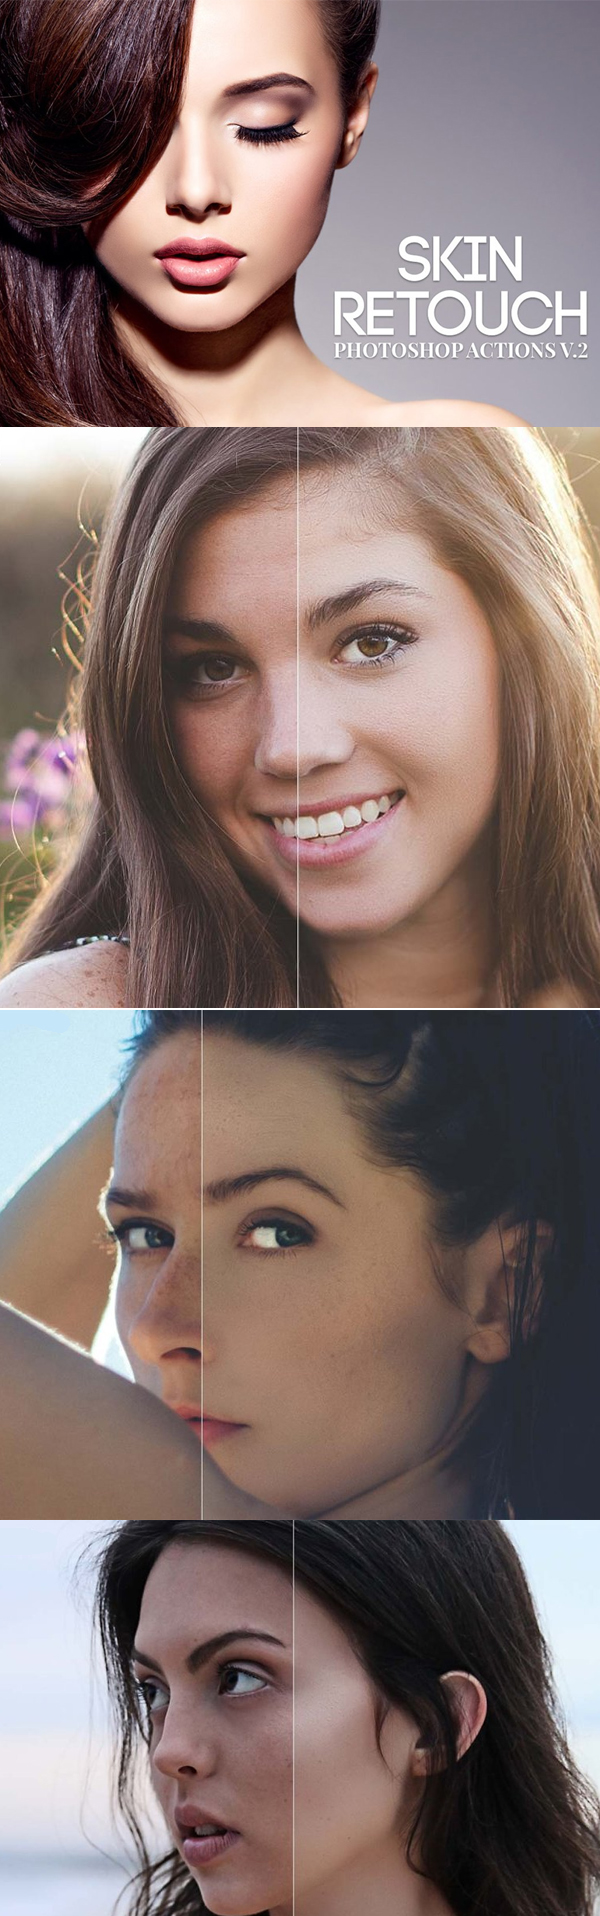 Skin Retouch Photoshop Actions